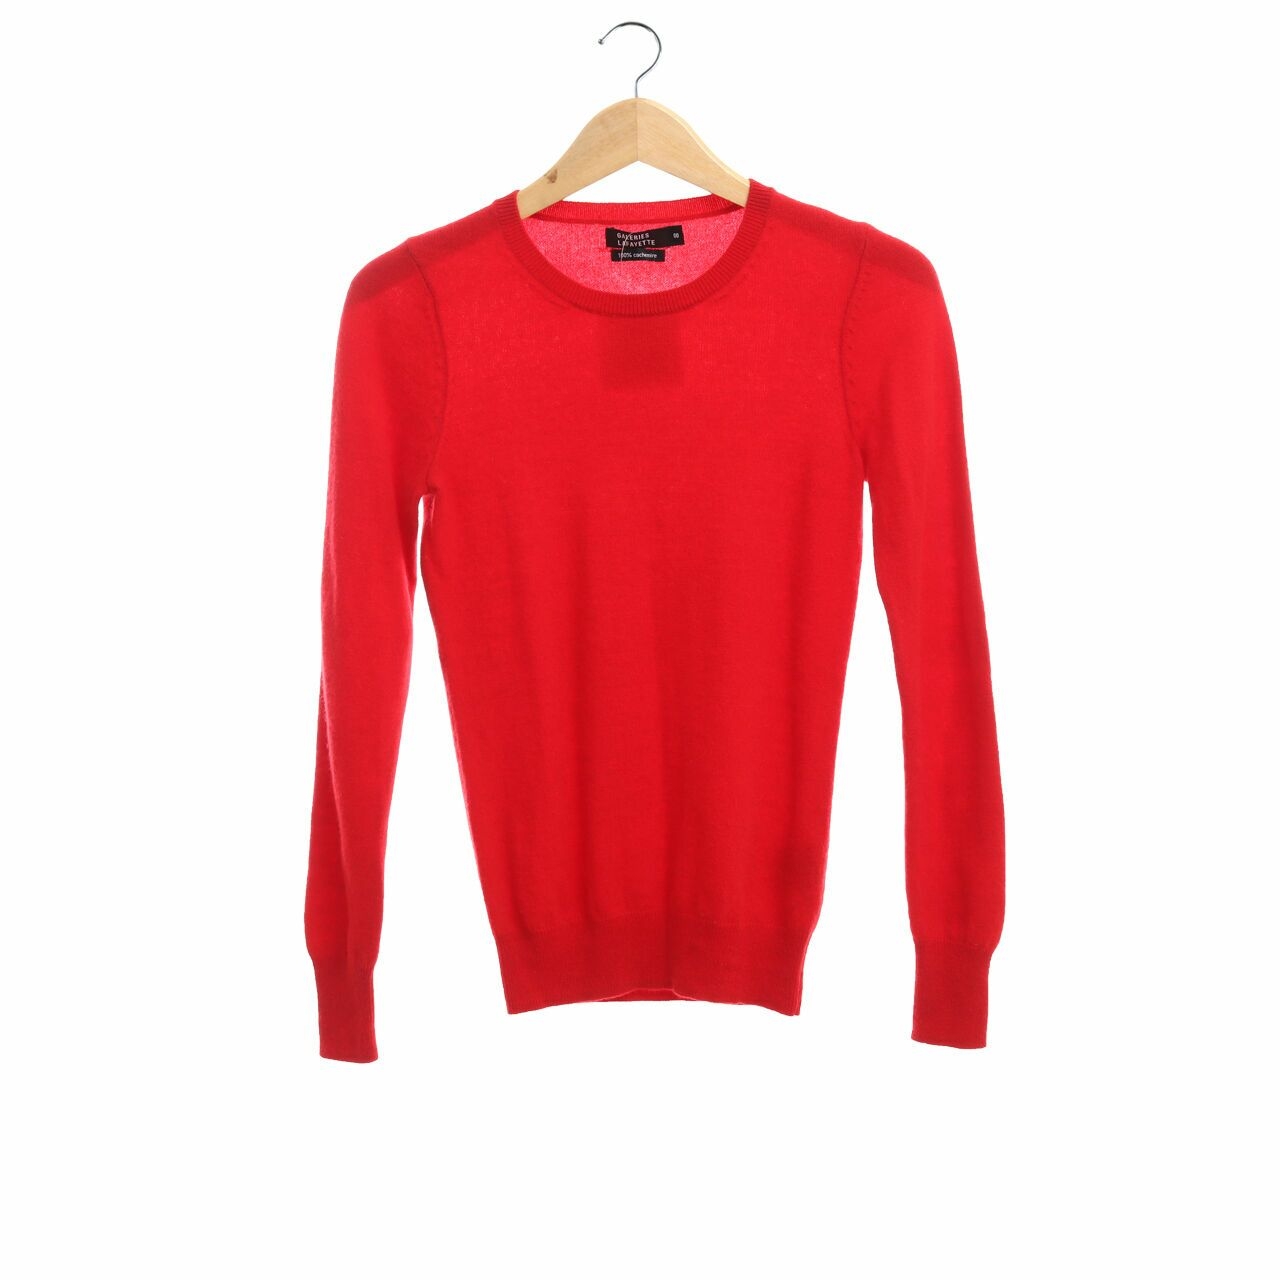 Galeries Lafayette Red Sweater